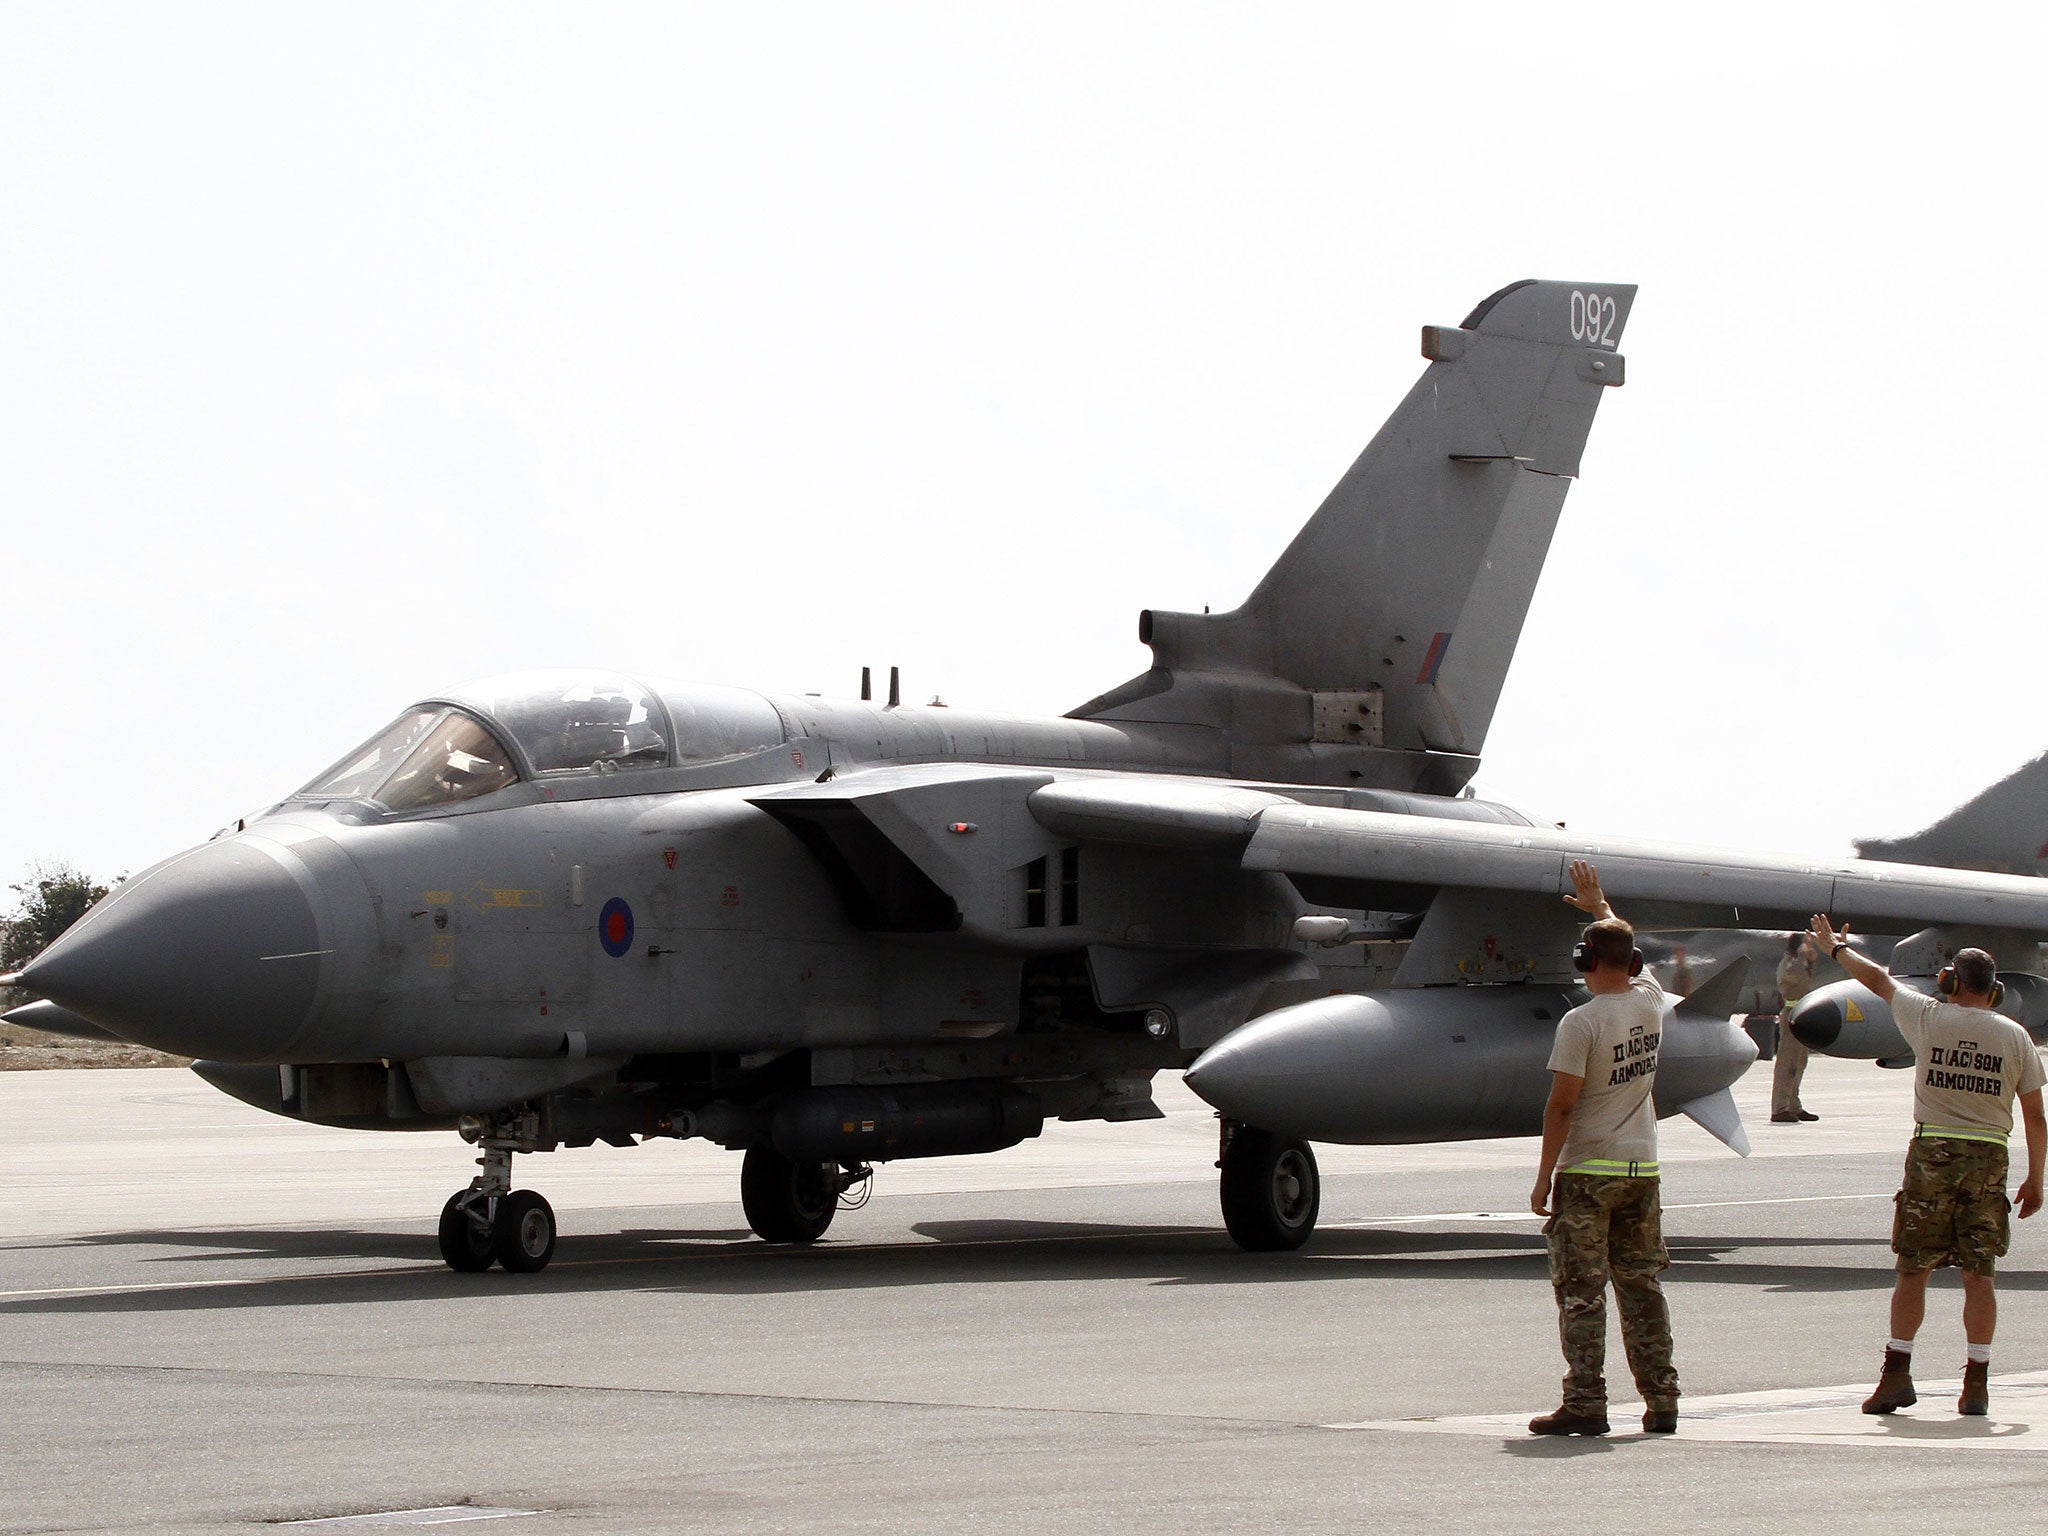 A Royal Air Force Tornado GR4 fighter jet prepares to take off on September 27, 2014, at the Akrotiri British RAF airbase near the Cypriot port city of Limassol.